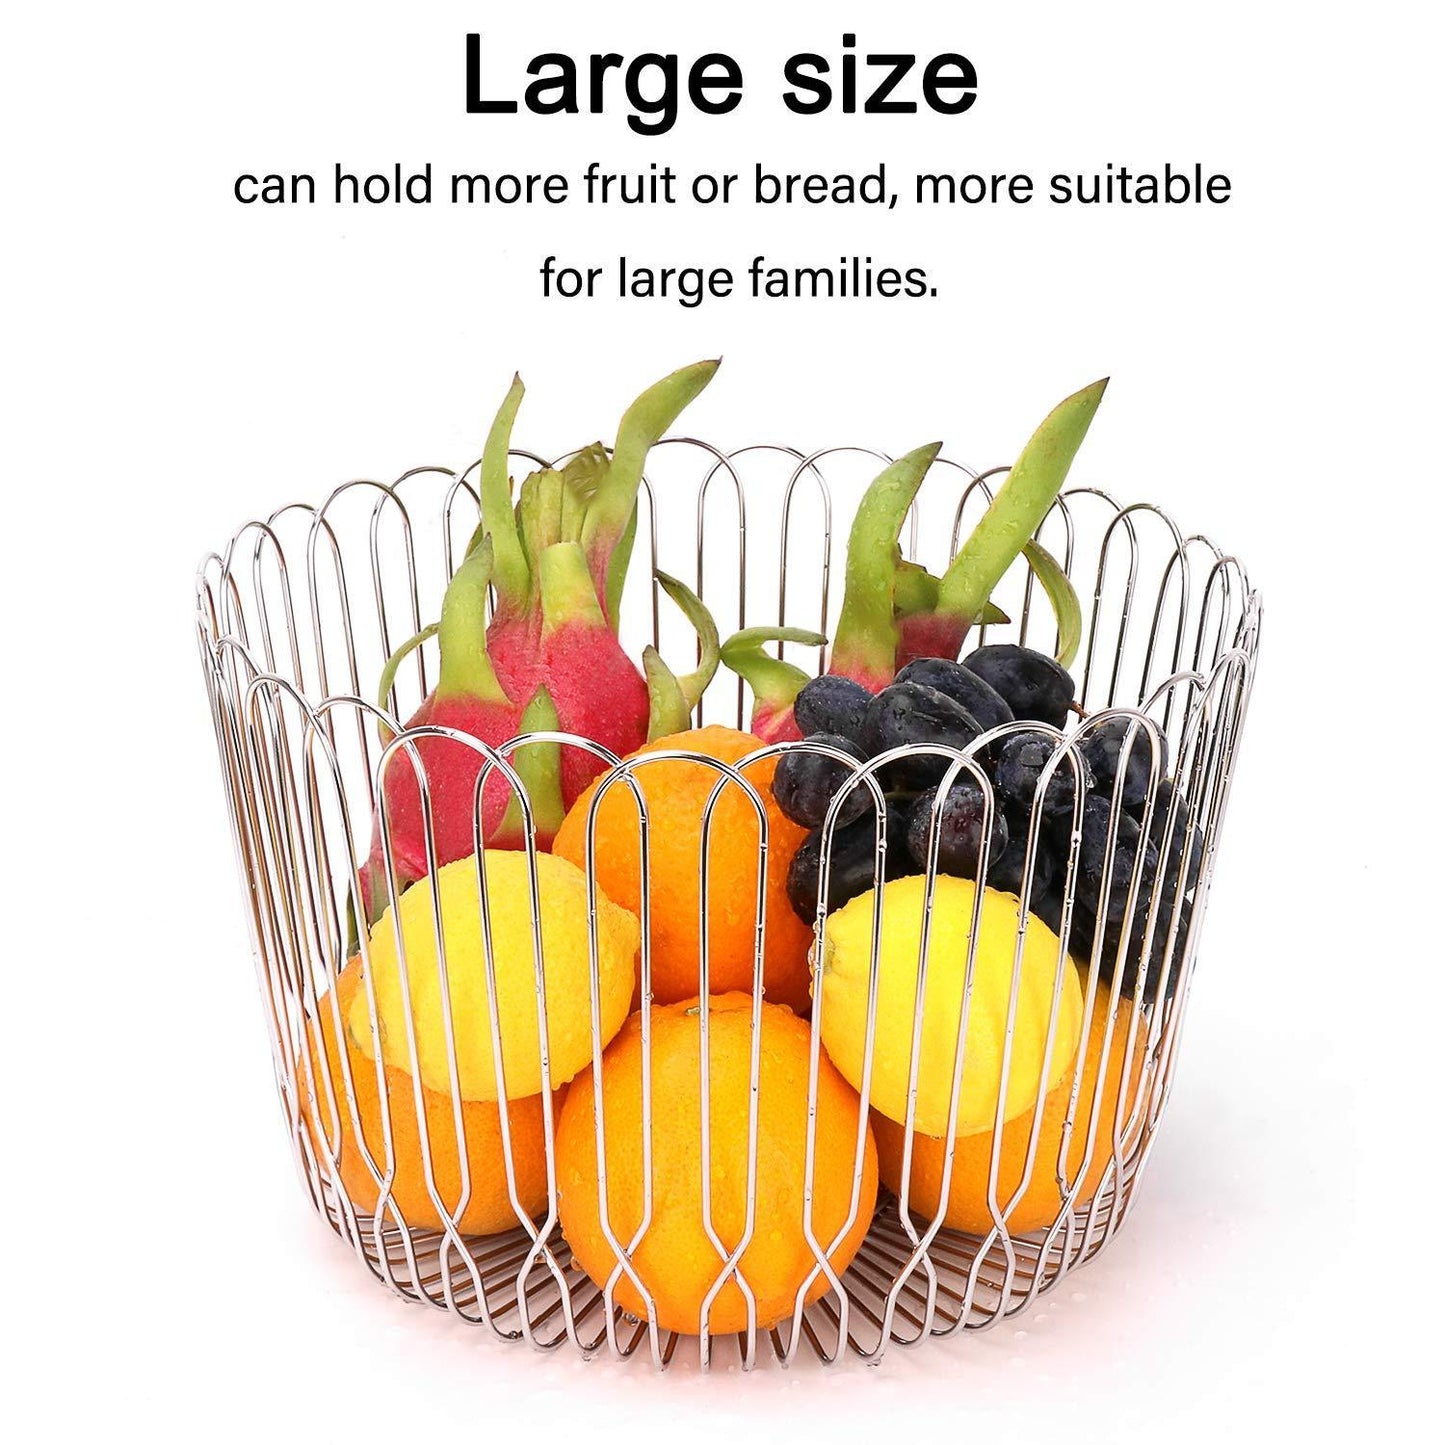 Organize with fruit basket bowl stainless steel large wire fruit storage basket with bread for kitchen counter lanejoy